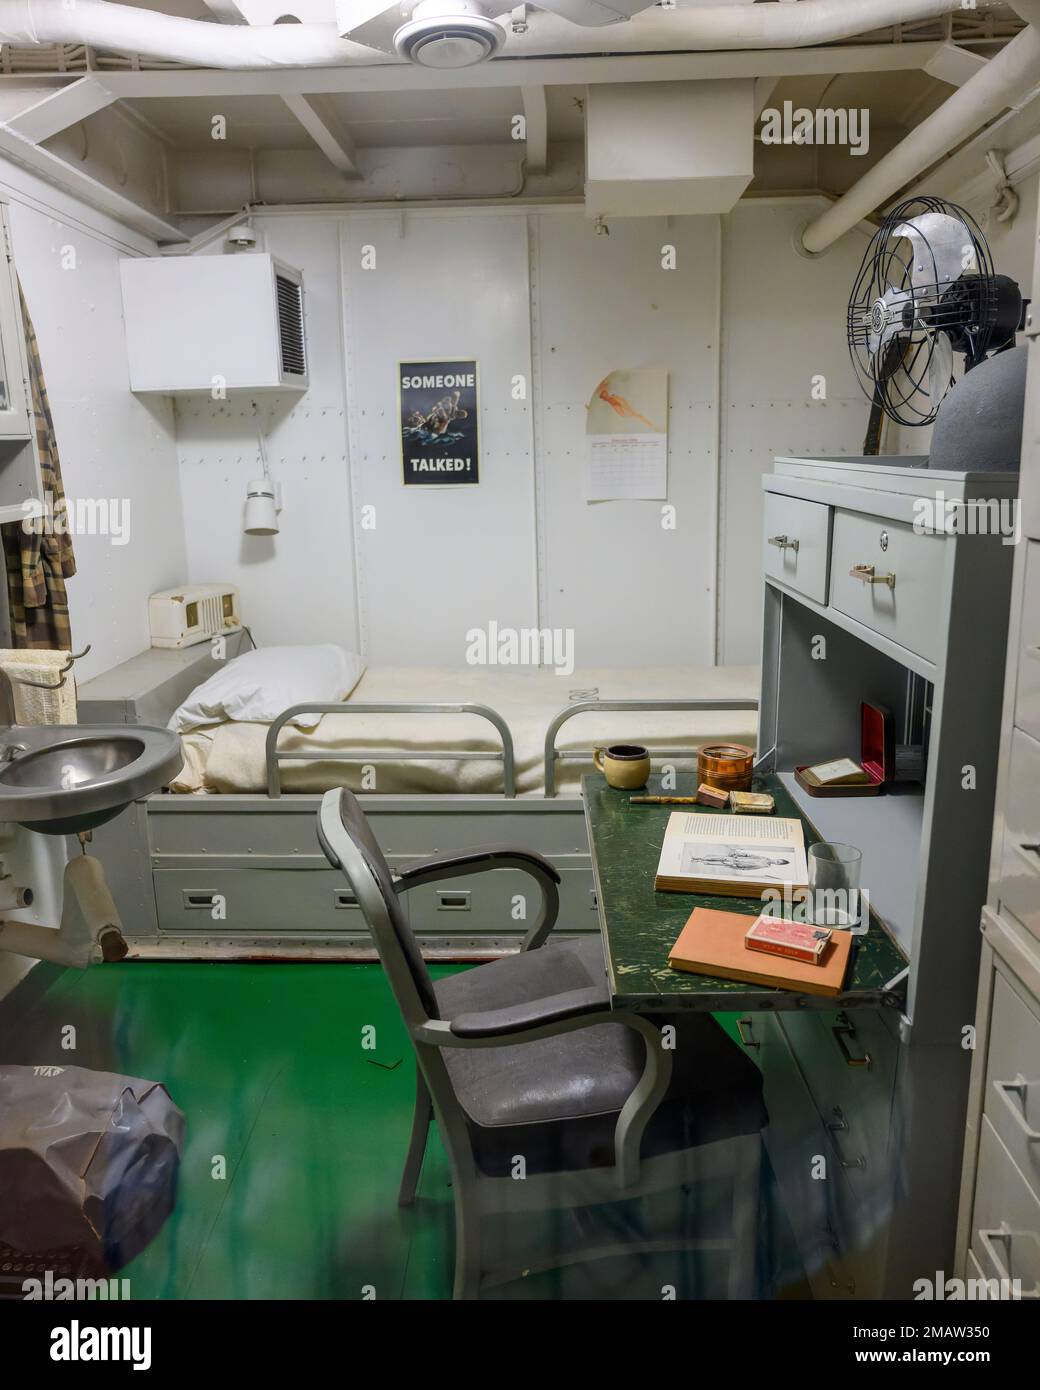 Captain's quarters or state room for the captain of the USS Alabama battleship showing a writing desk, bunk and sink in a small space. Stock Photo